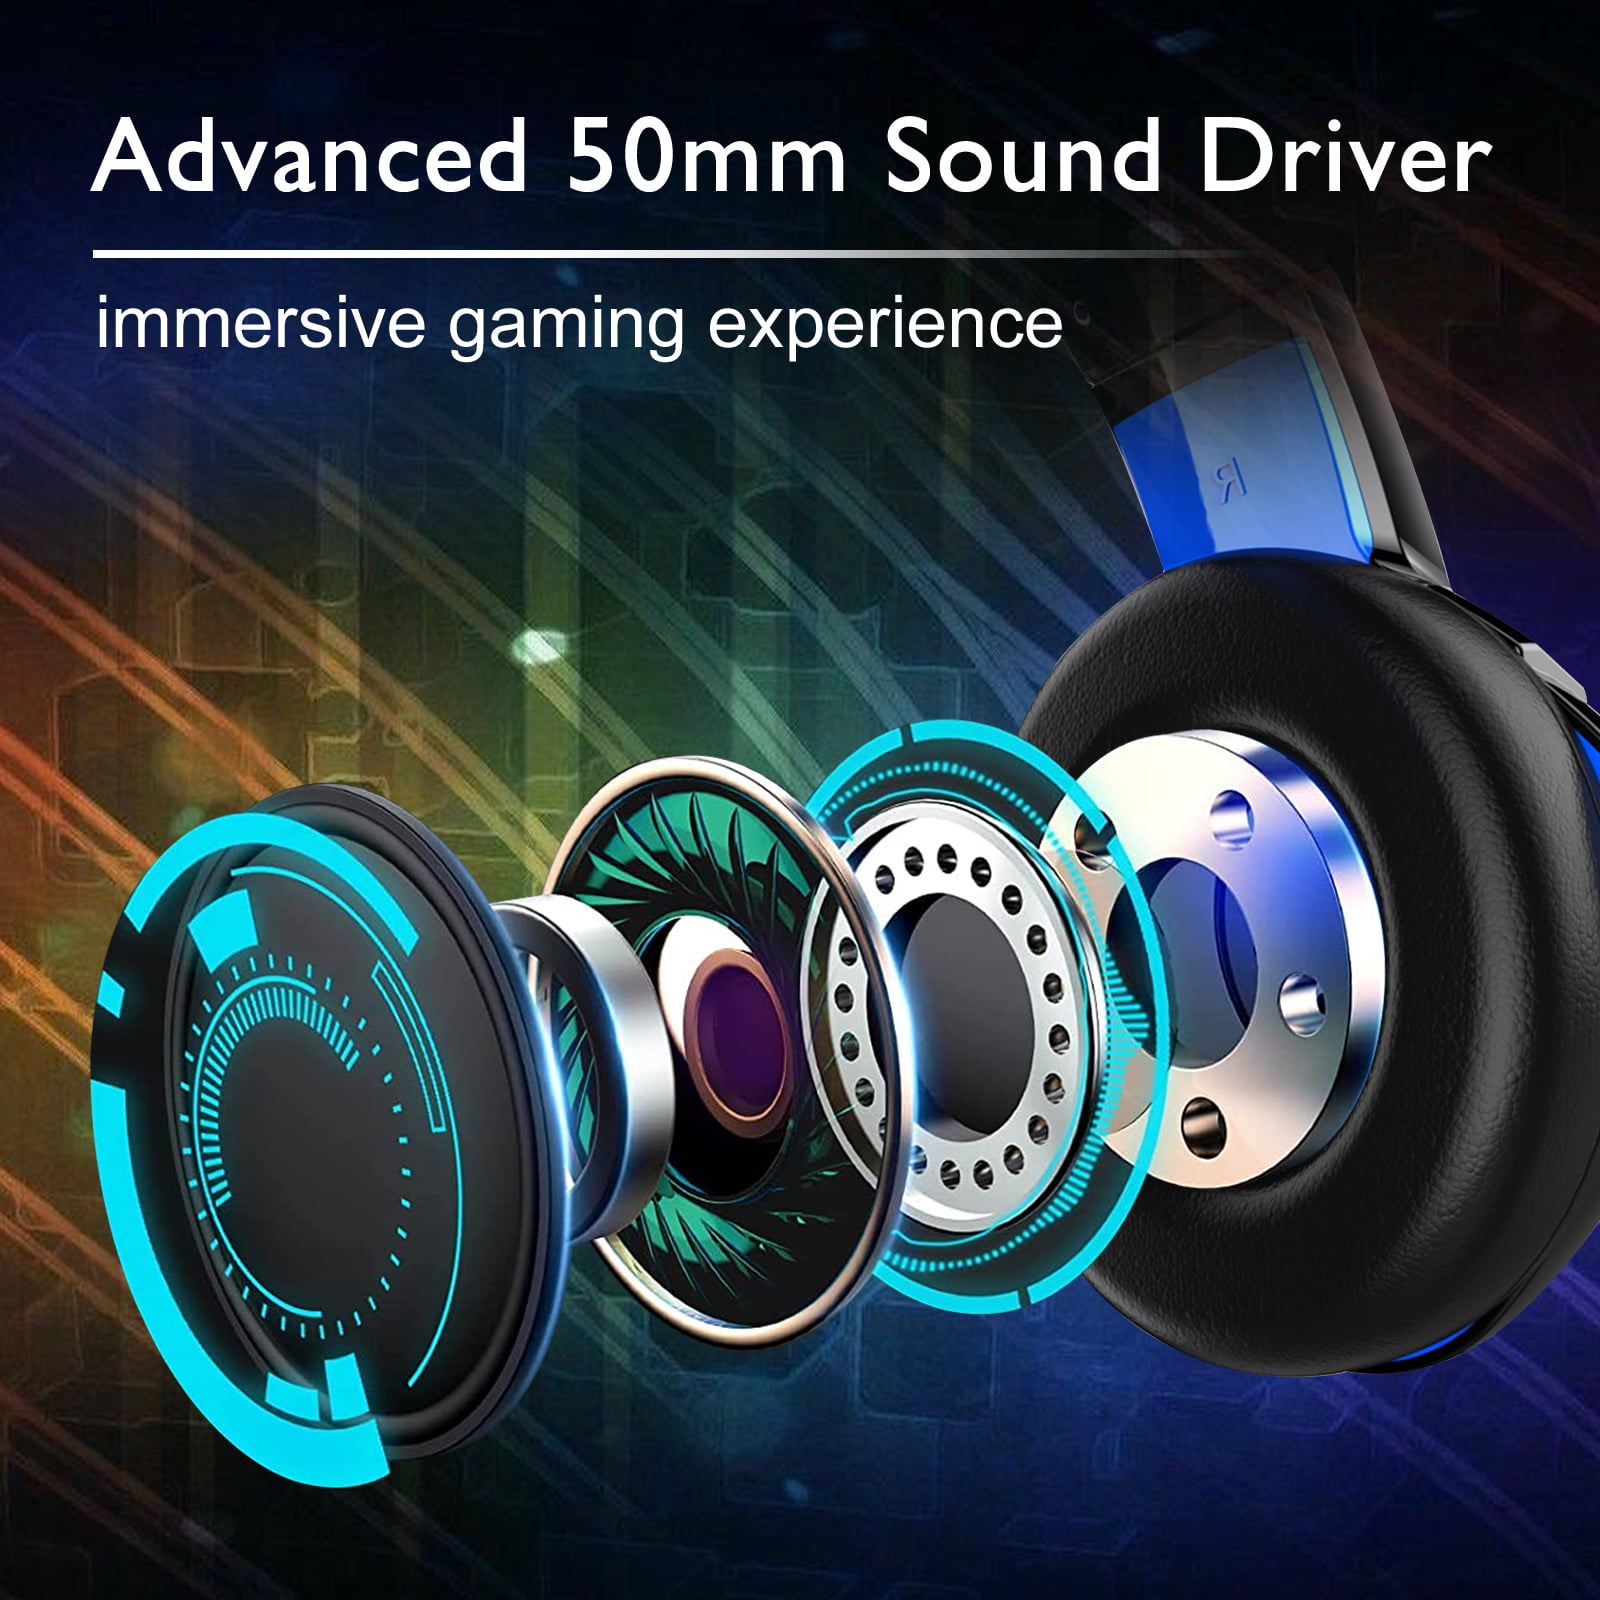 Samoleus Gaming Headset for PS4 Xbox One PC Smartphone 50mm Driver Wired Stereo Bose Noise Cancelling Gaming Headphone with Mic and LED Light for PS4 Playstation 4 Color Mobile Phone Laptops PC